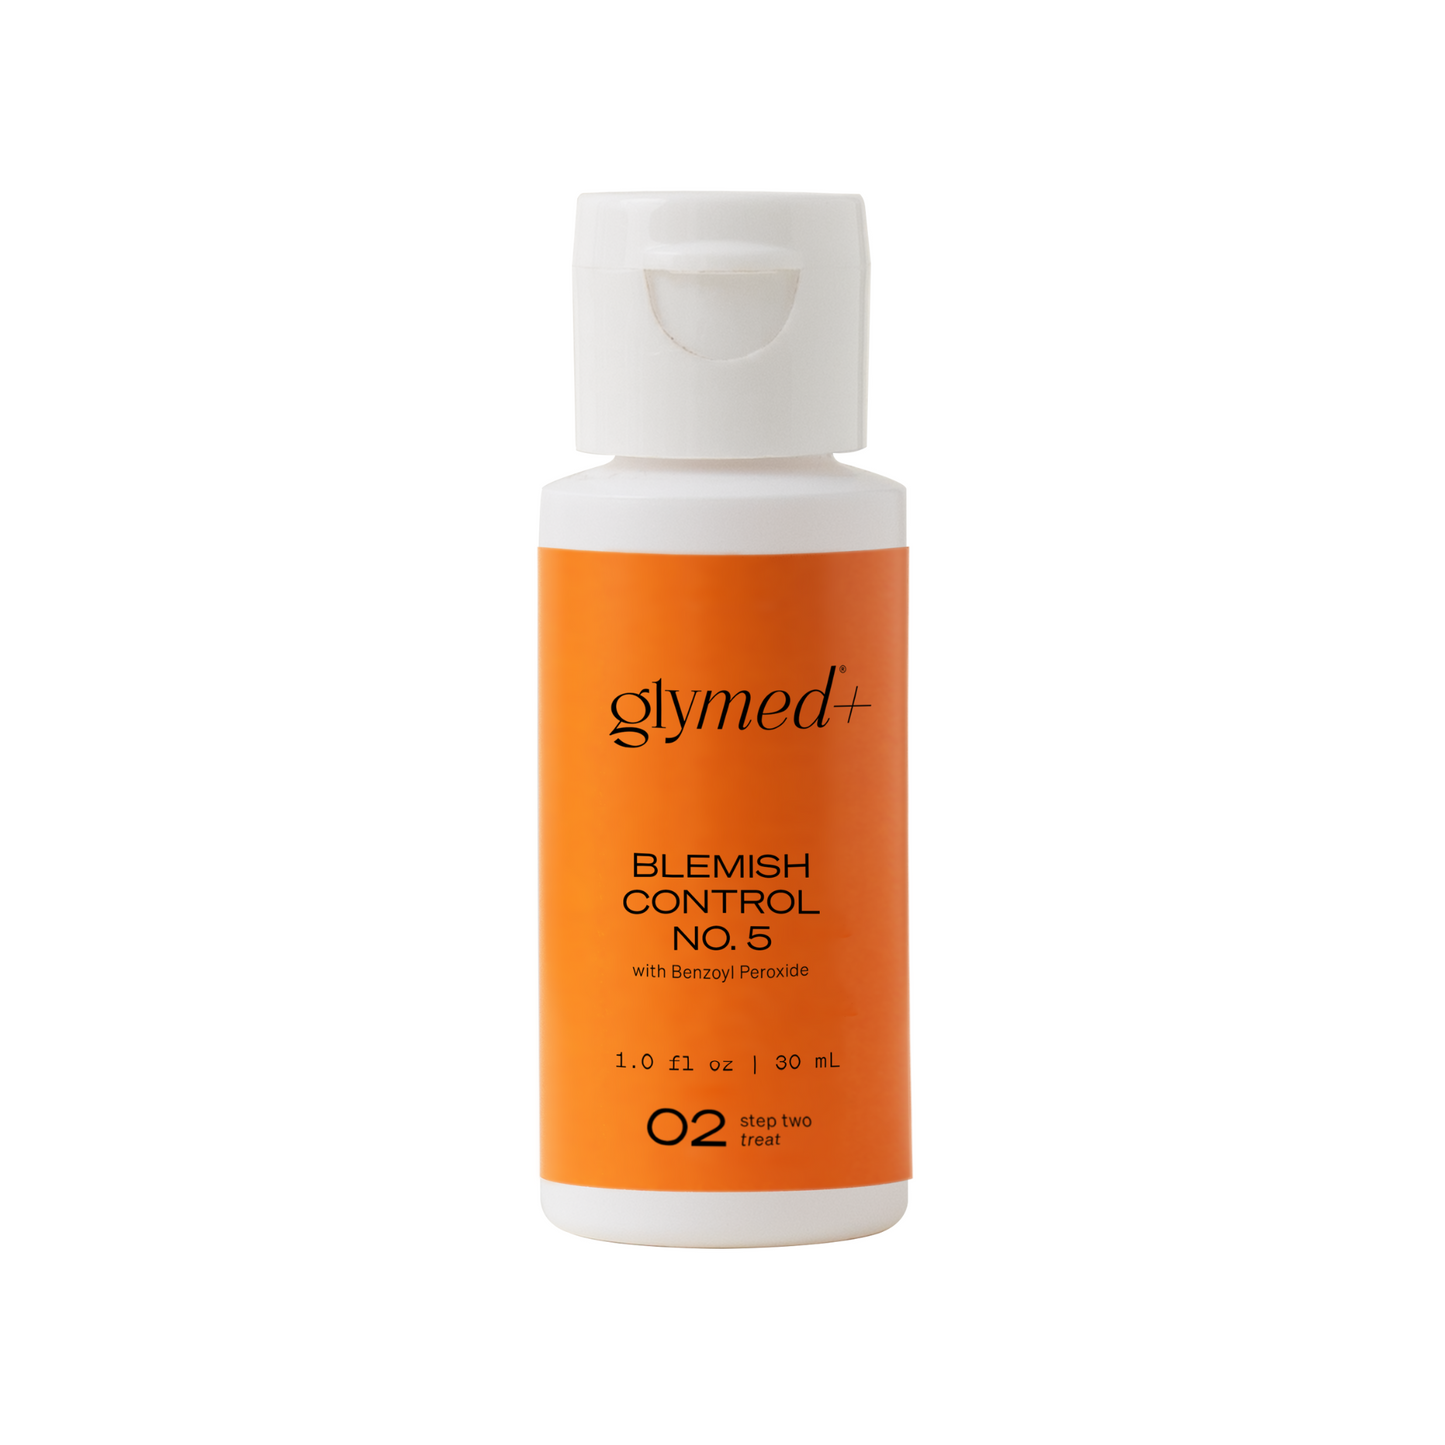 Blemish Control No. 5 with Benzoyl Peroxide | Glymed Plus